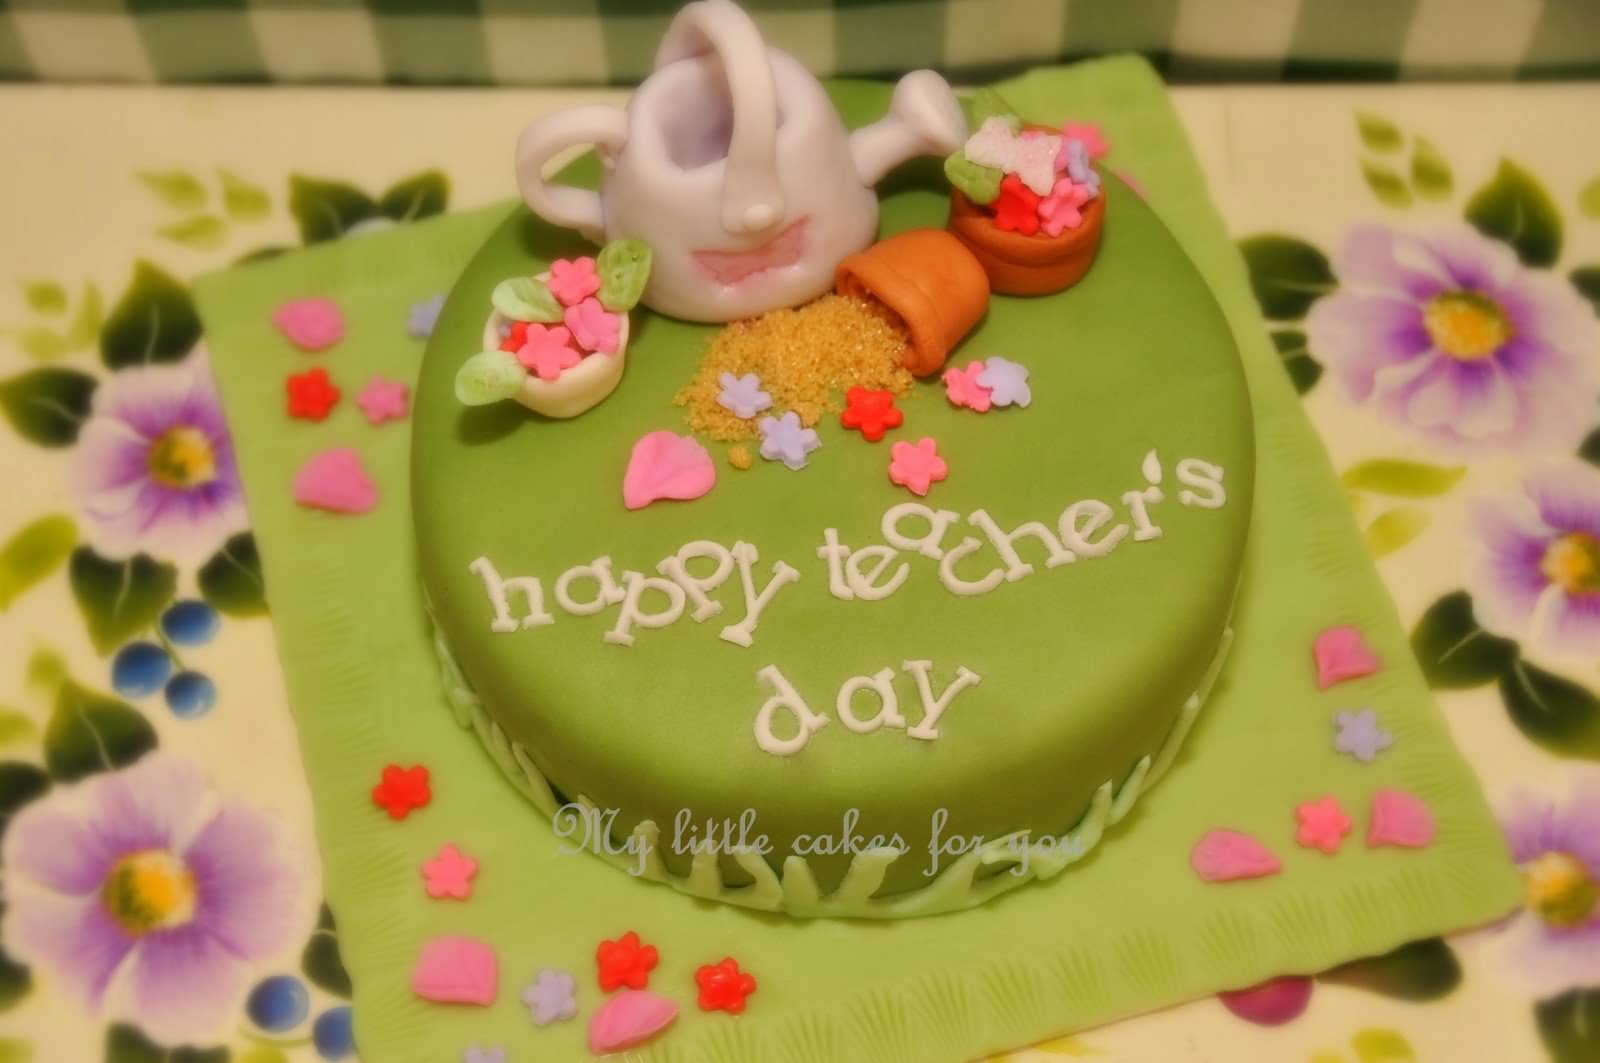 Happy Teachers Day Cake Picture - Dp For Teachers Day - HD Wallpaper 